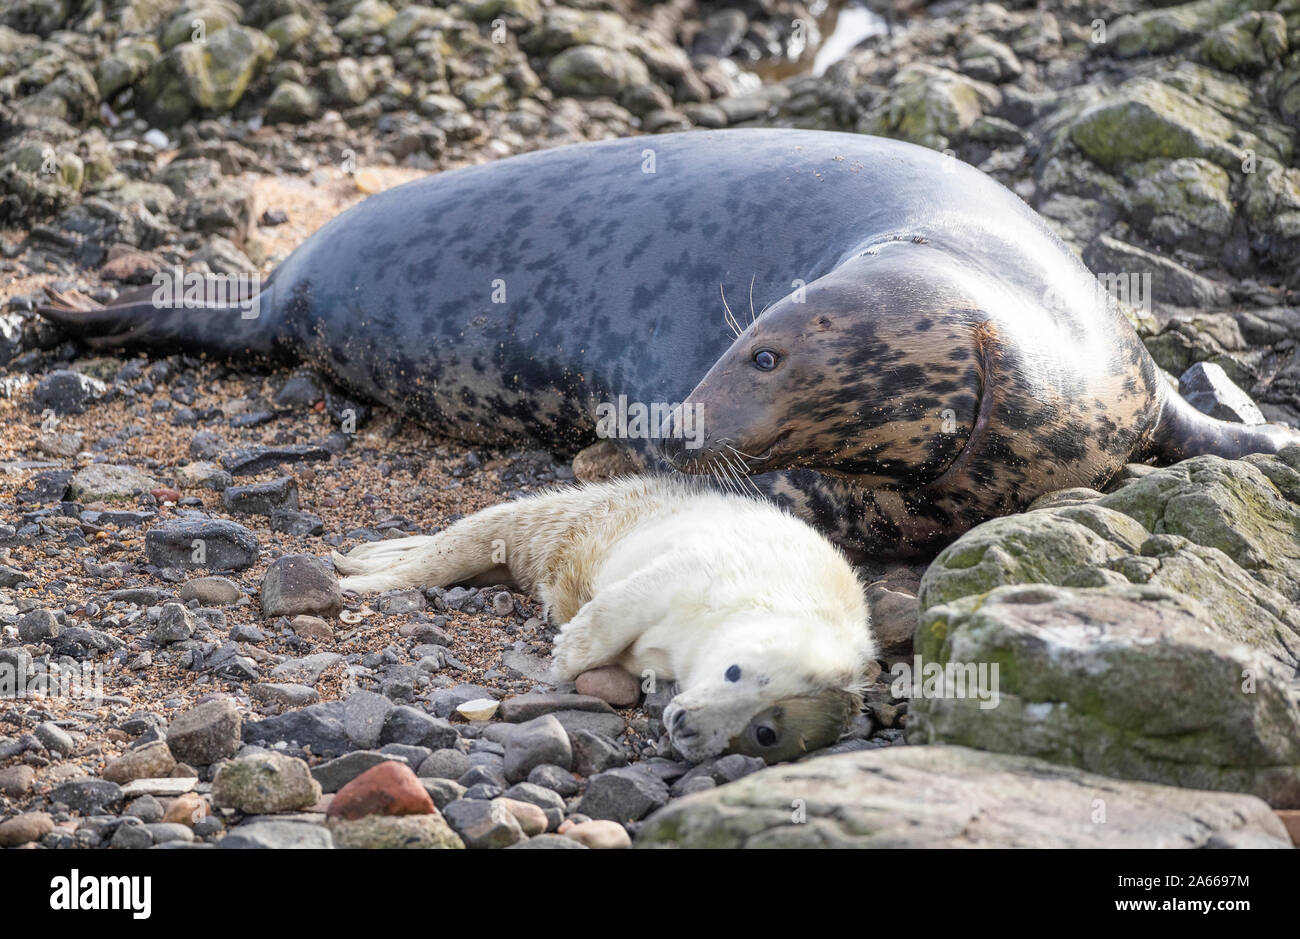 Grey seal pups on the Isle of May in the Firth of Forth. The island is one of Scottish Natural Heritage's National Nature Reserves, home to one of the UKs most important grey seal colonies. Stock Photo